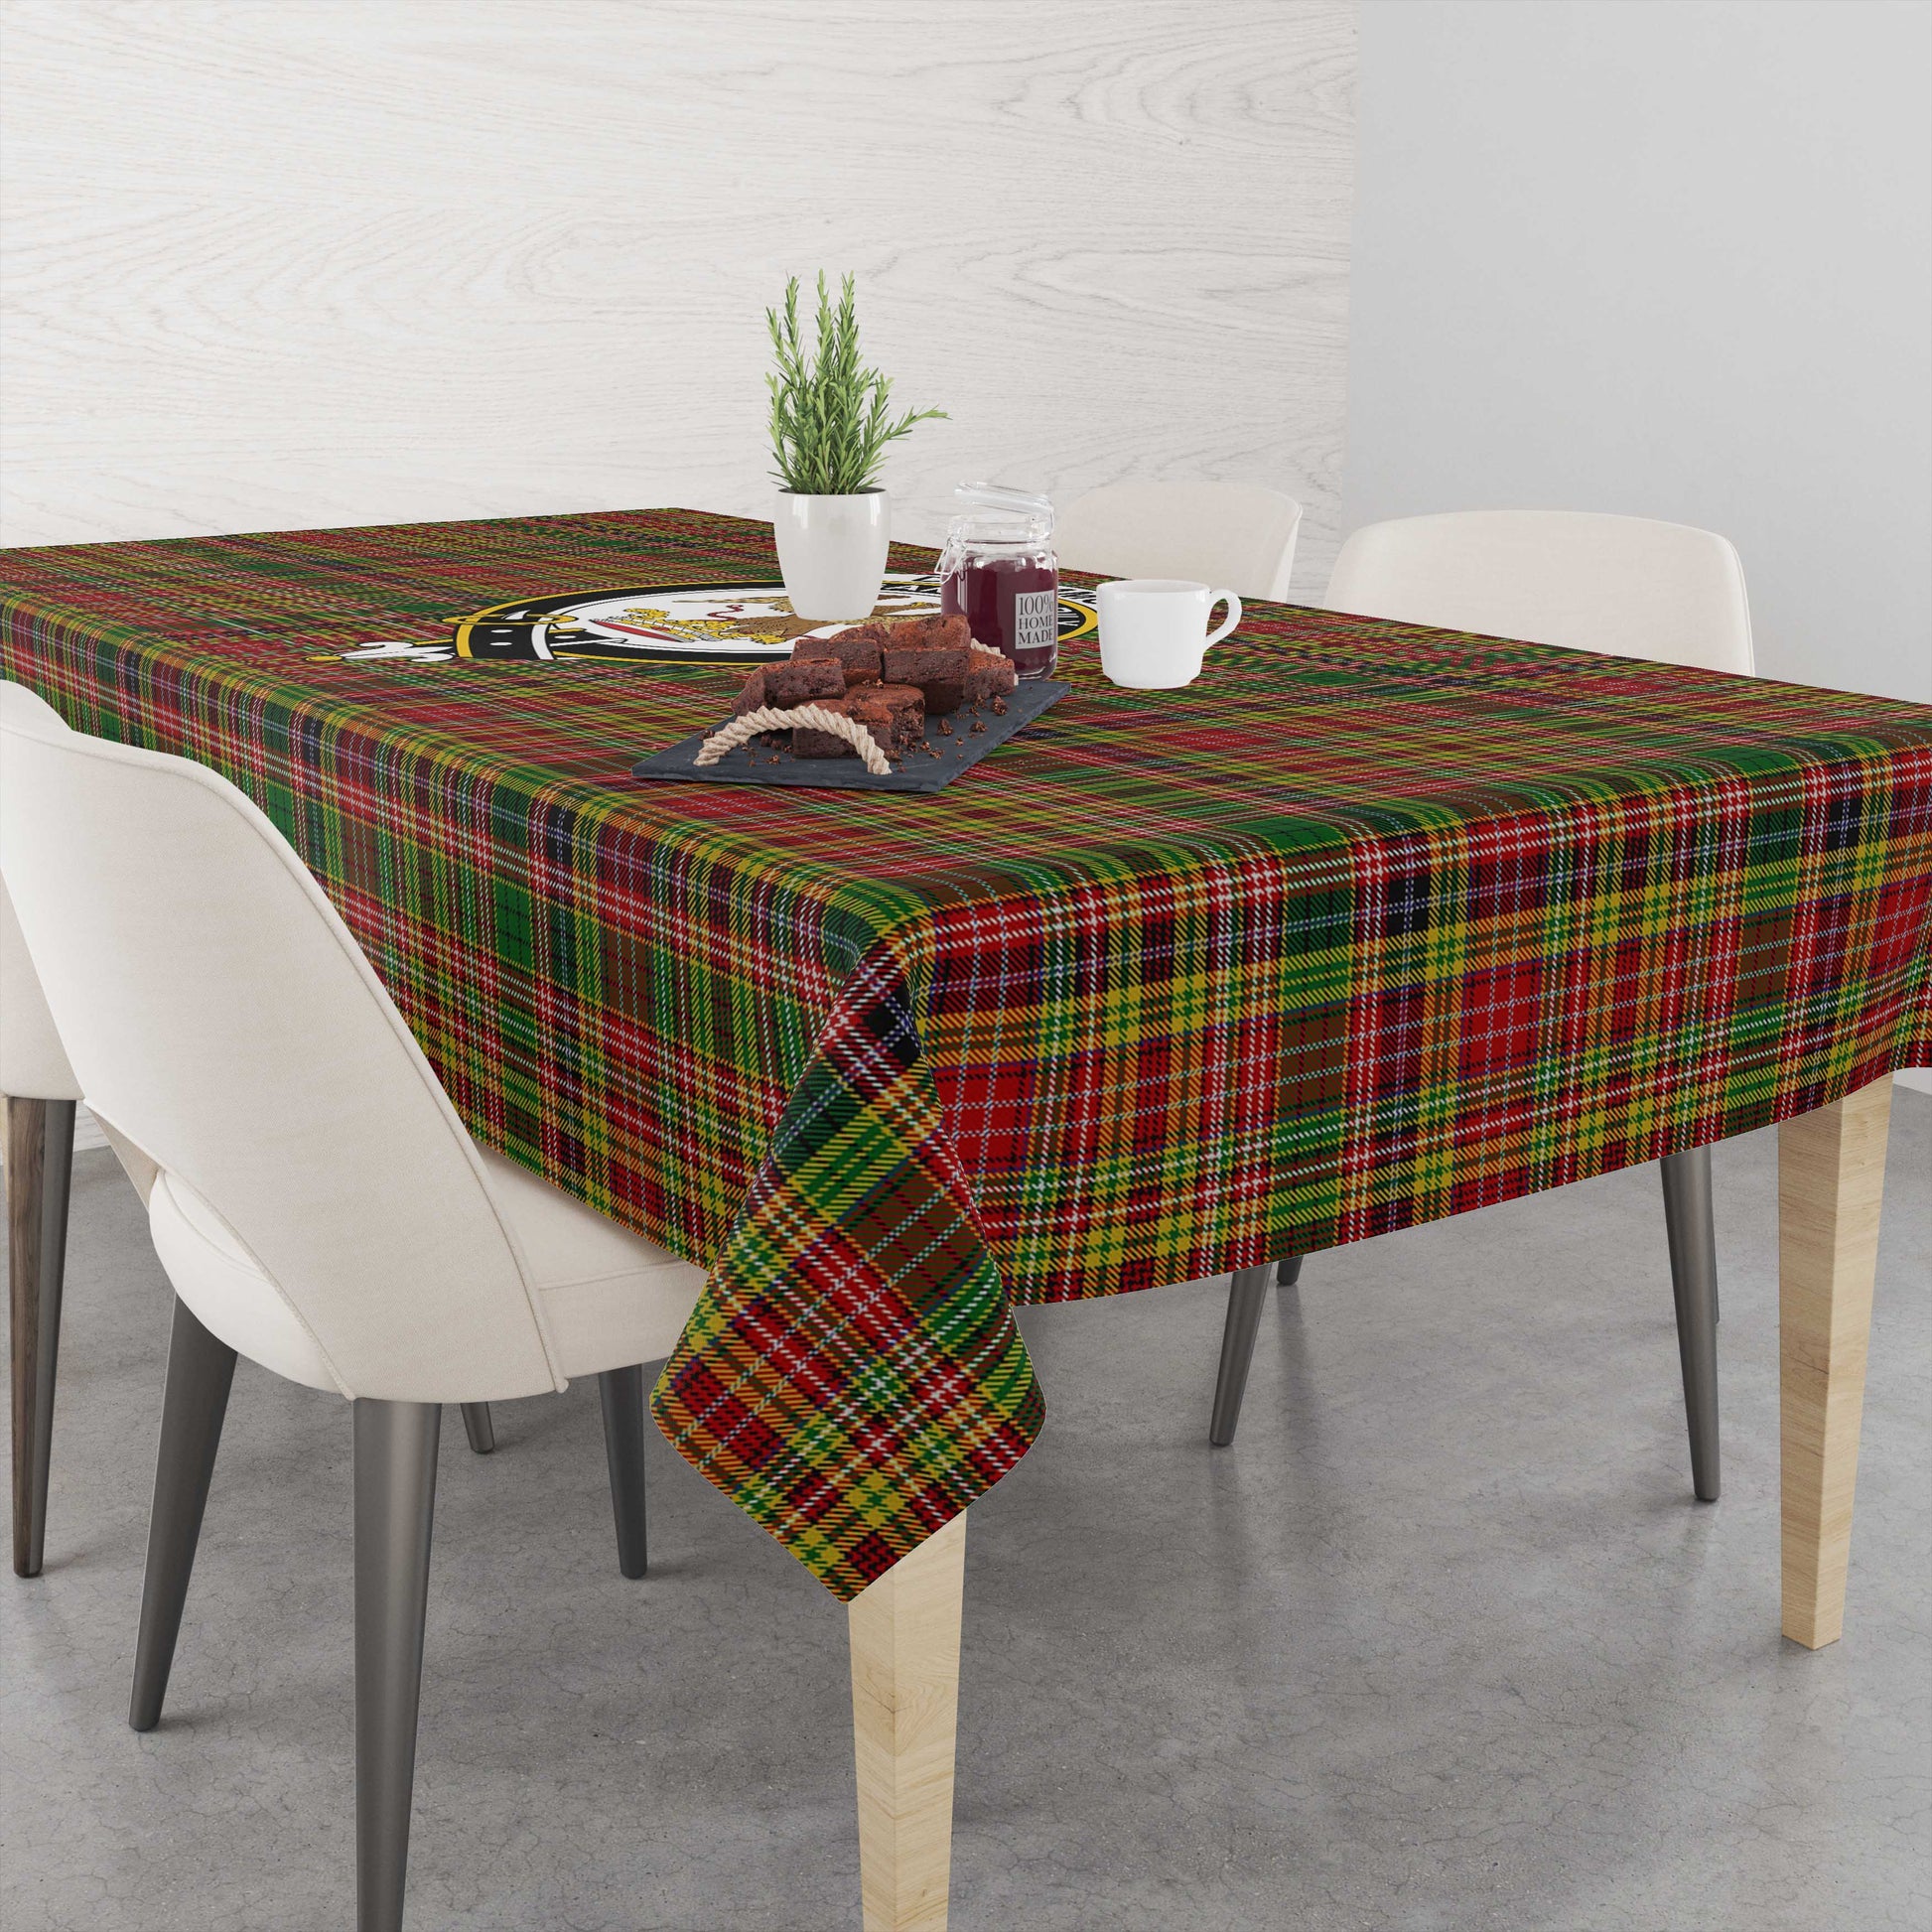 drummond-of-strathallan-tatan-tablecloth-with-family-crest